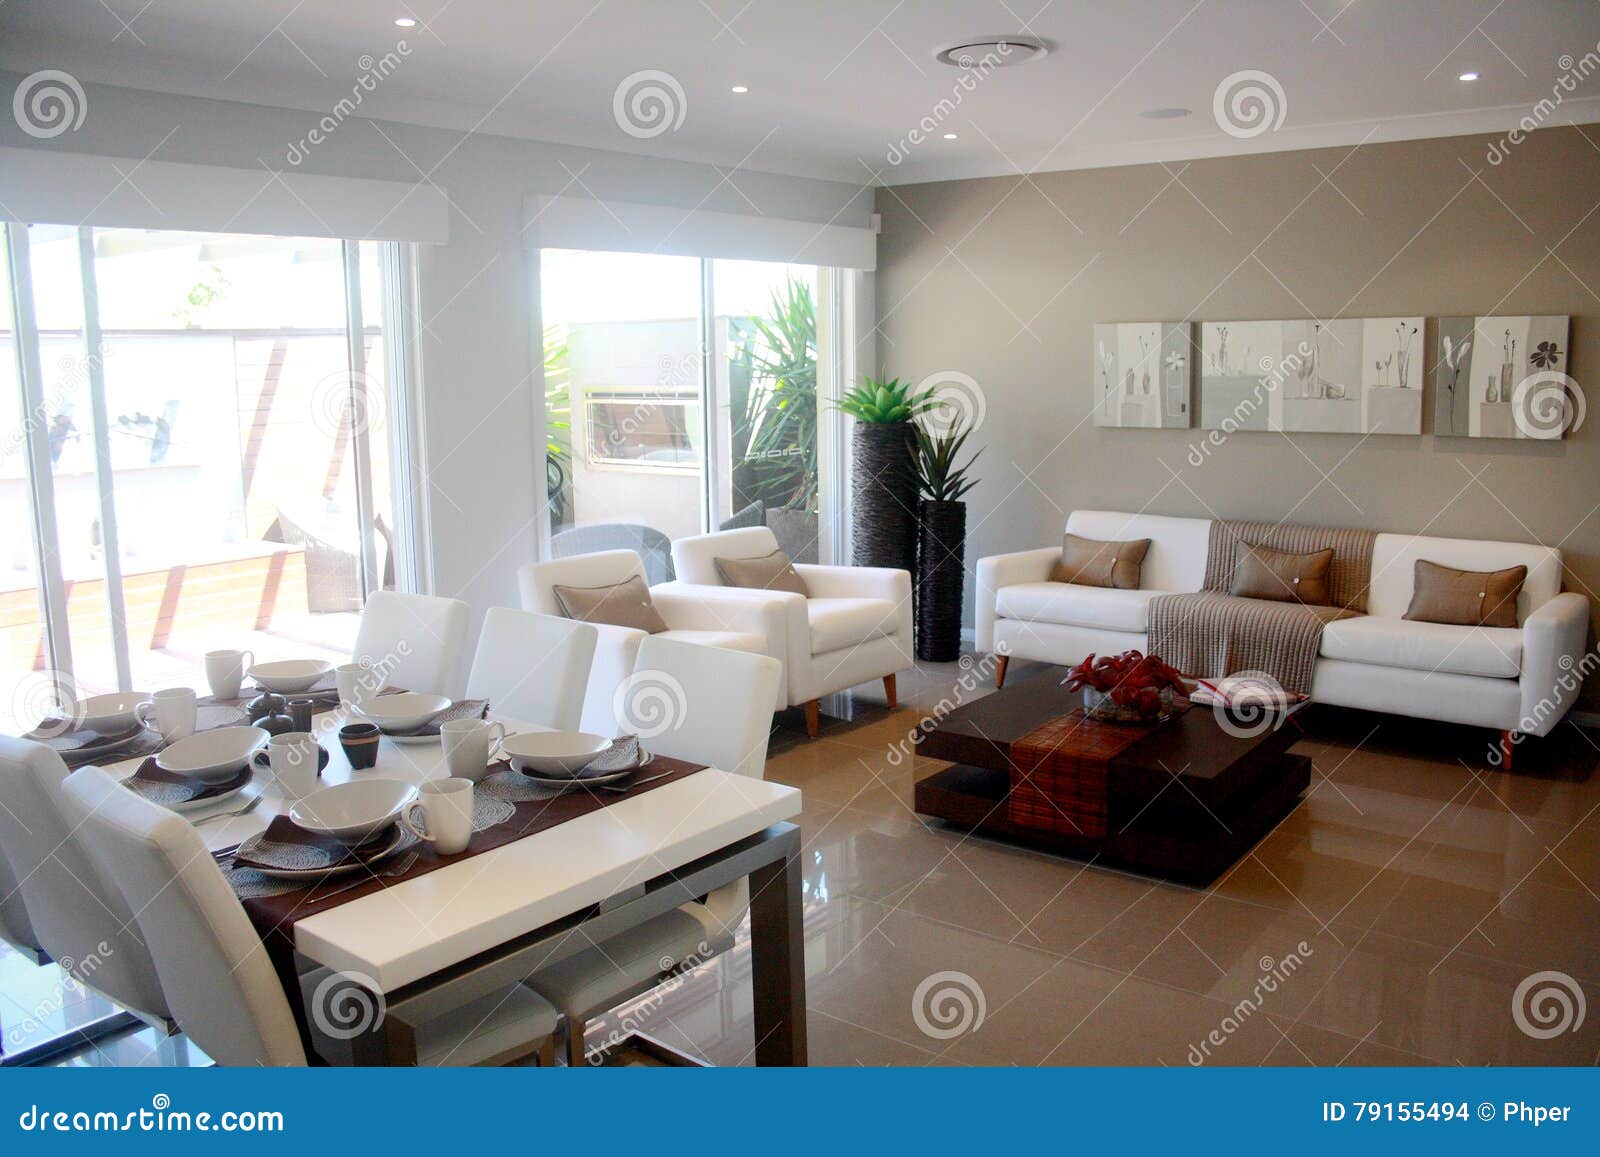 modern interior  living room with dinning table